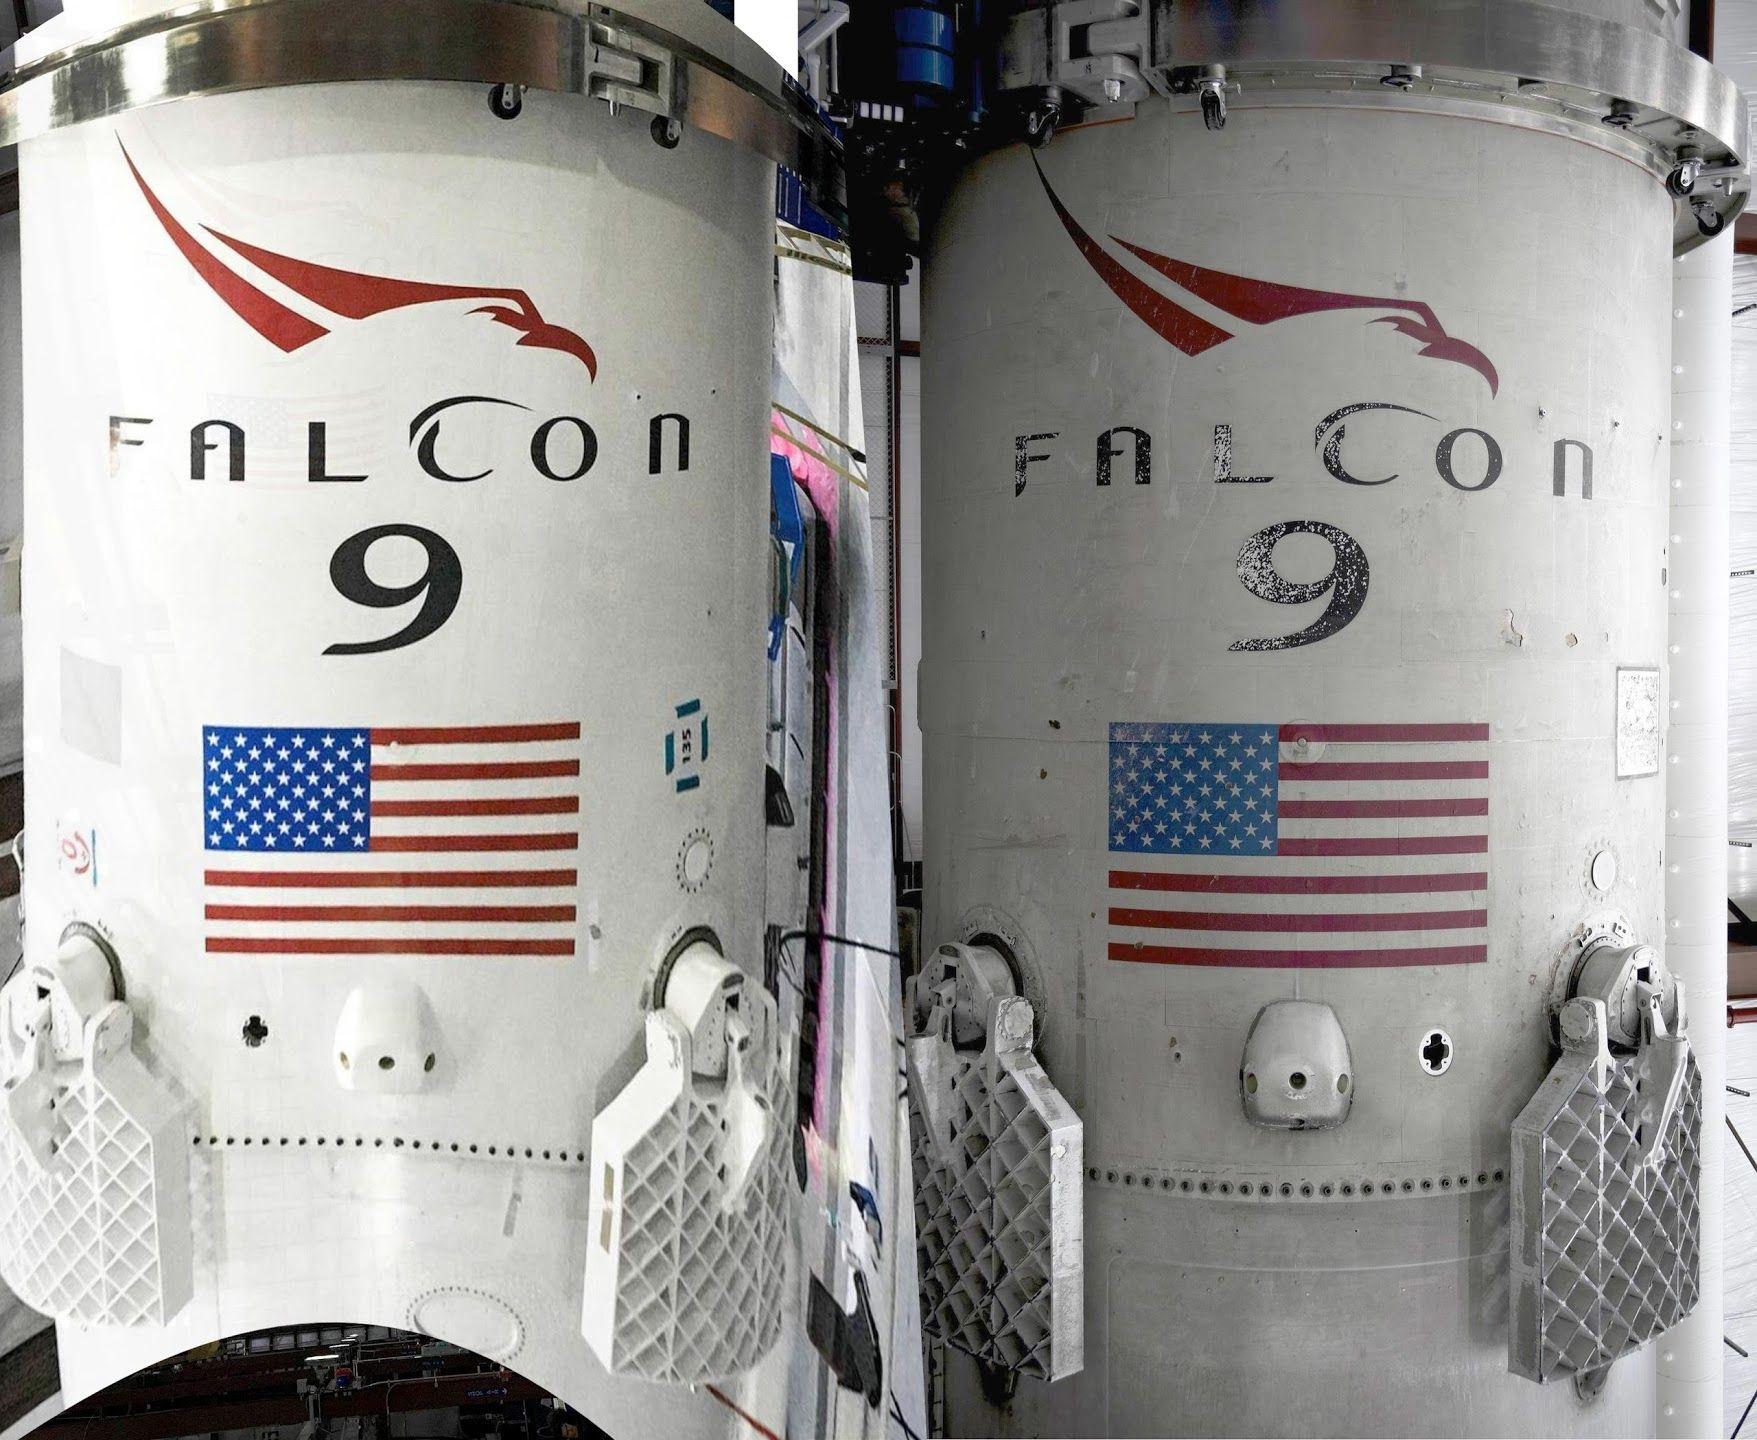 Falcon 9 Rocket Logo - SpaceX says Falcon 9 rocket is undamaged after historic landing